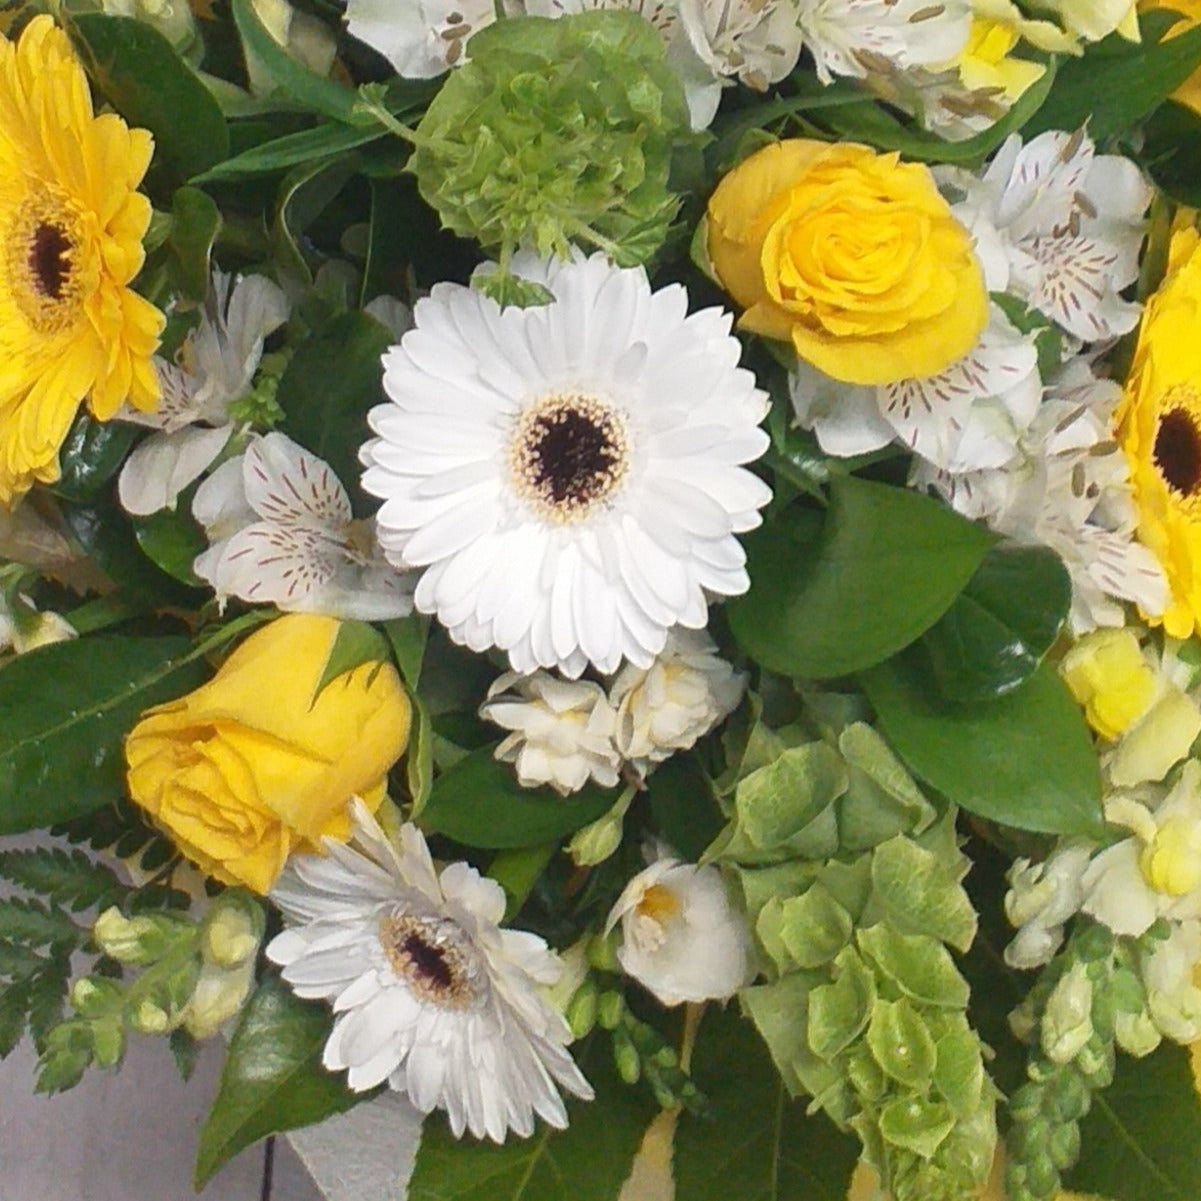 Fresh as Spring flower bouquet, yellow gerberas, bells of ireland, snap dragons, yellow roses, fern, alstroemeria, early cheer, wrapped in yellow